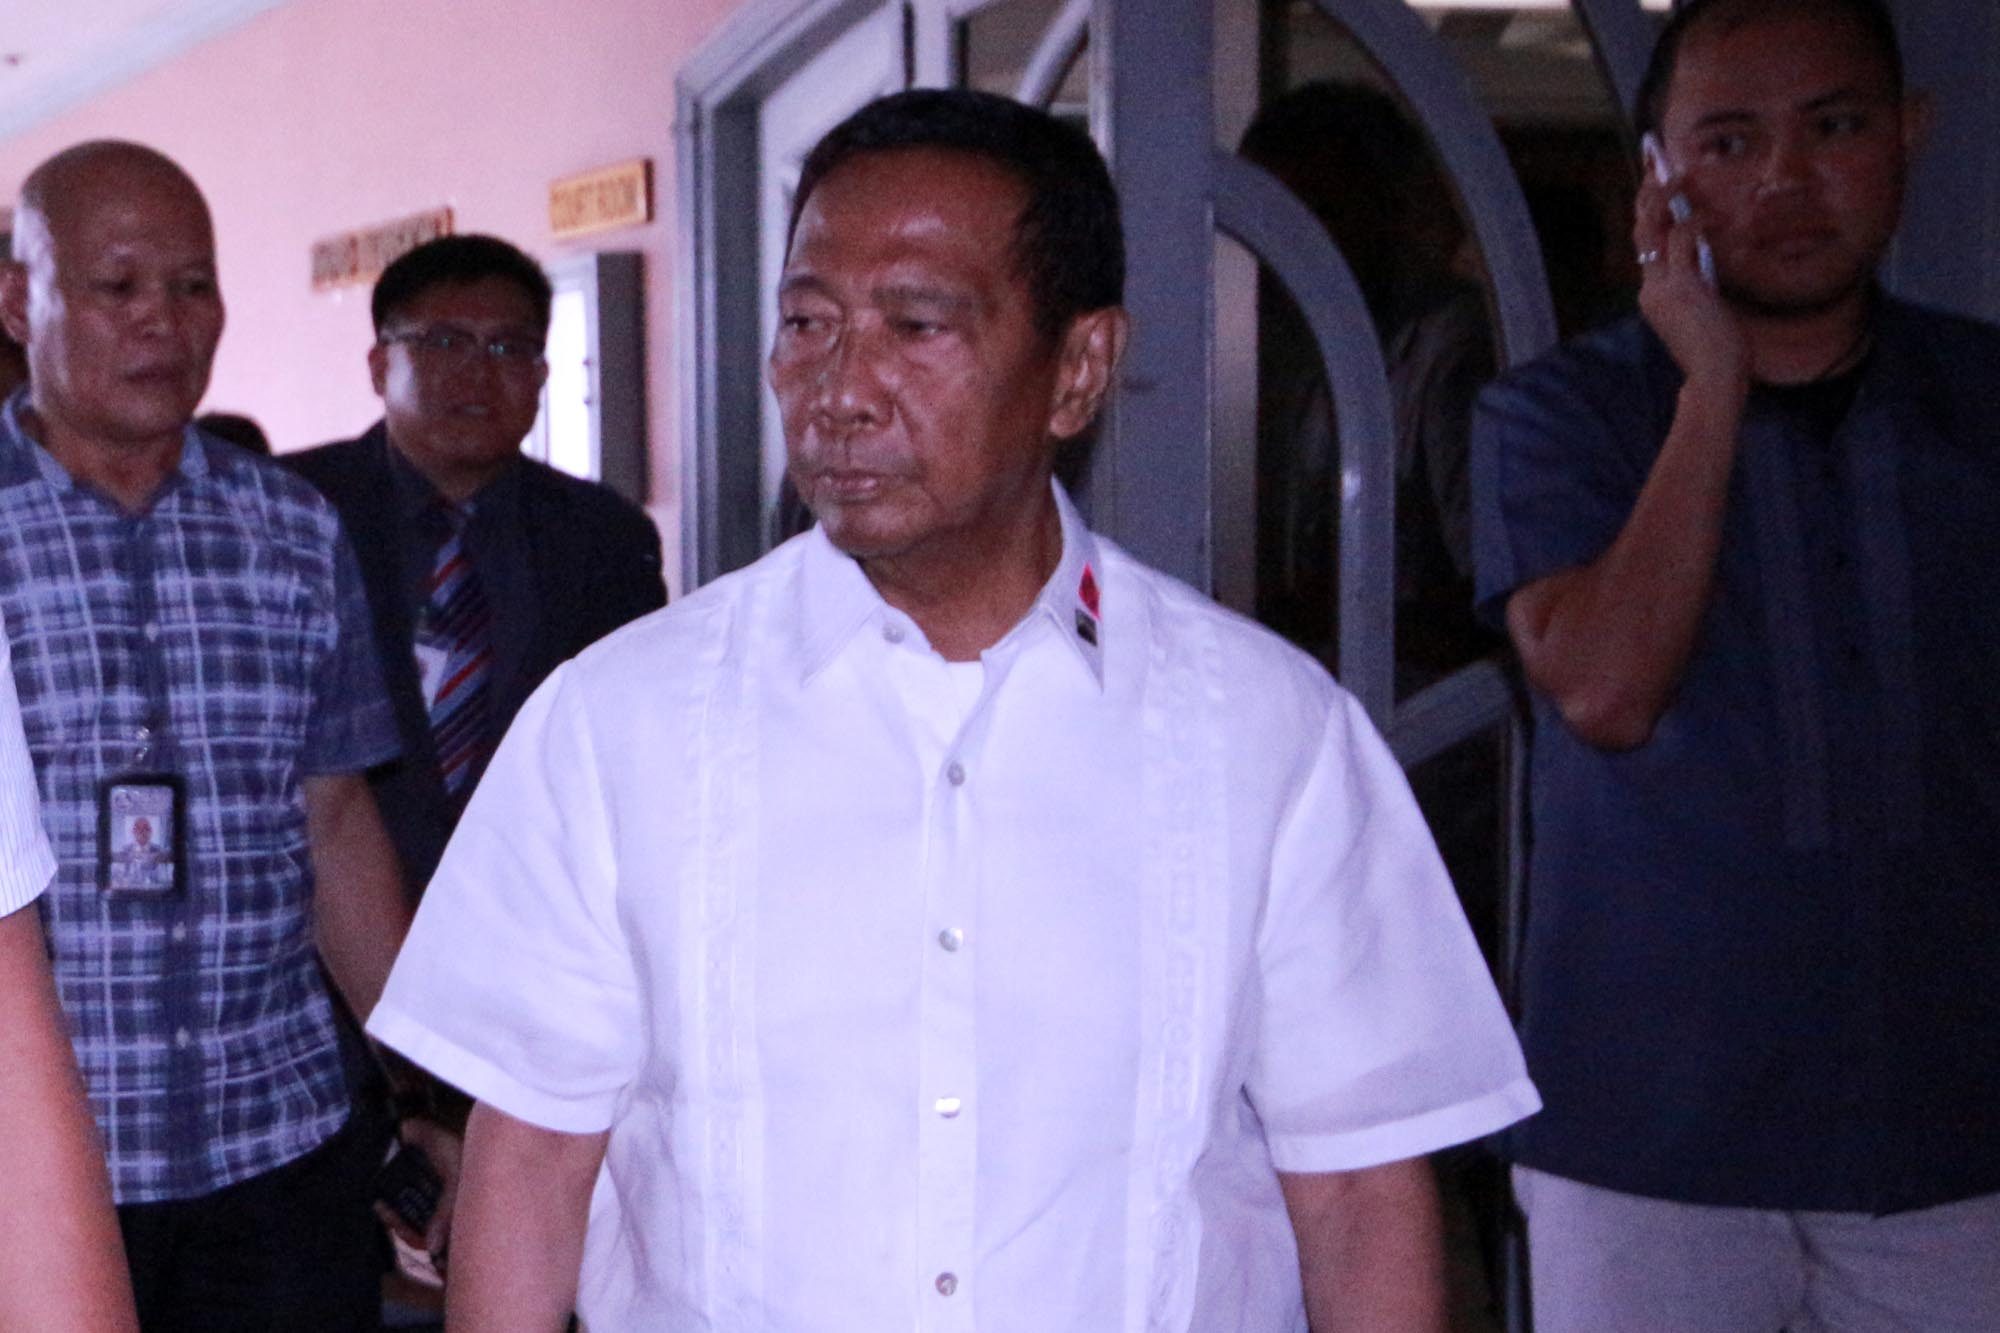 Sandiganbayan finds probable cause to try ex-VP Binay for graft